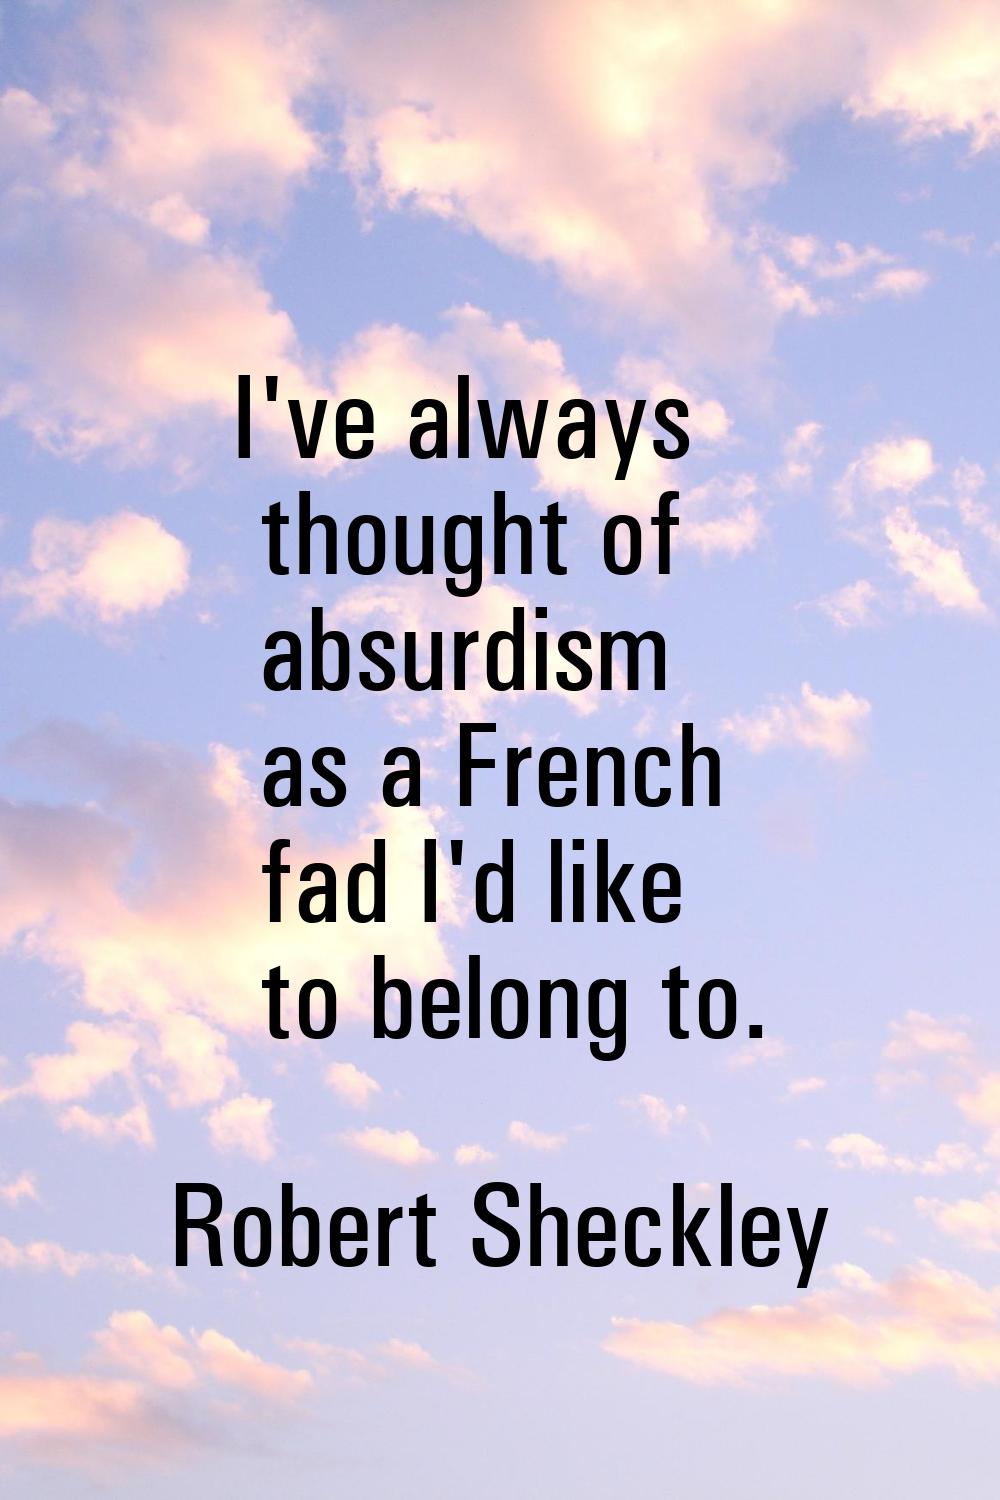 I've always thought of absurdism as a French fad I'd like to belong to.